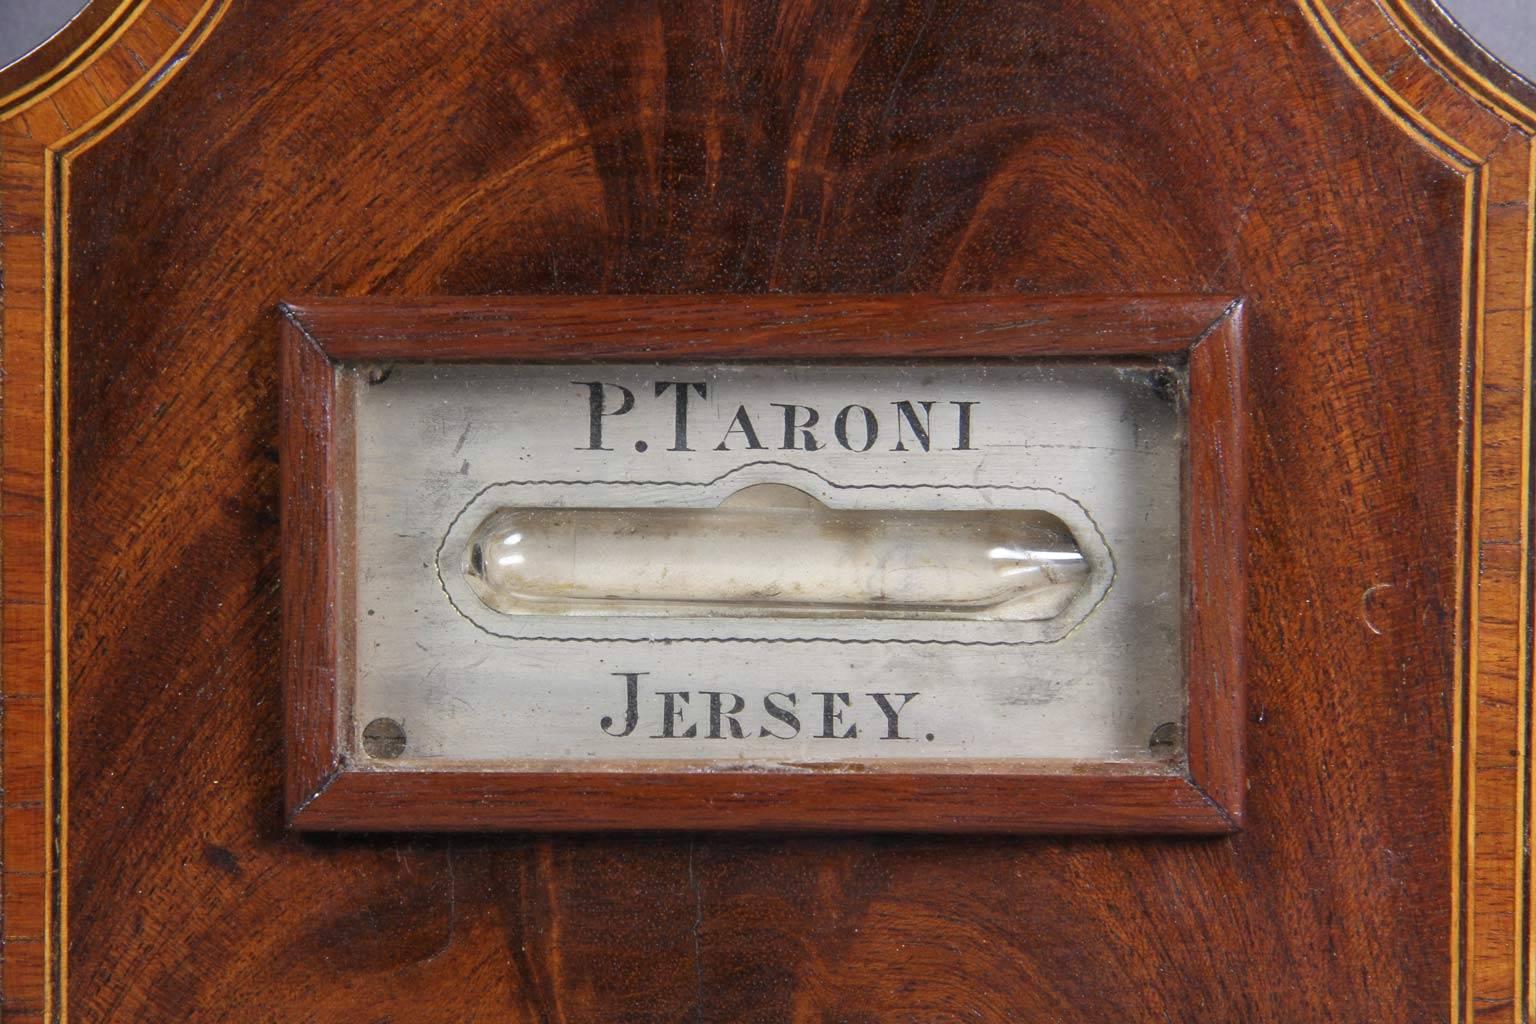 Other Regency Mahogany and Inlaid Barometer or Clock by P. Taroni, Jersey